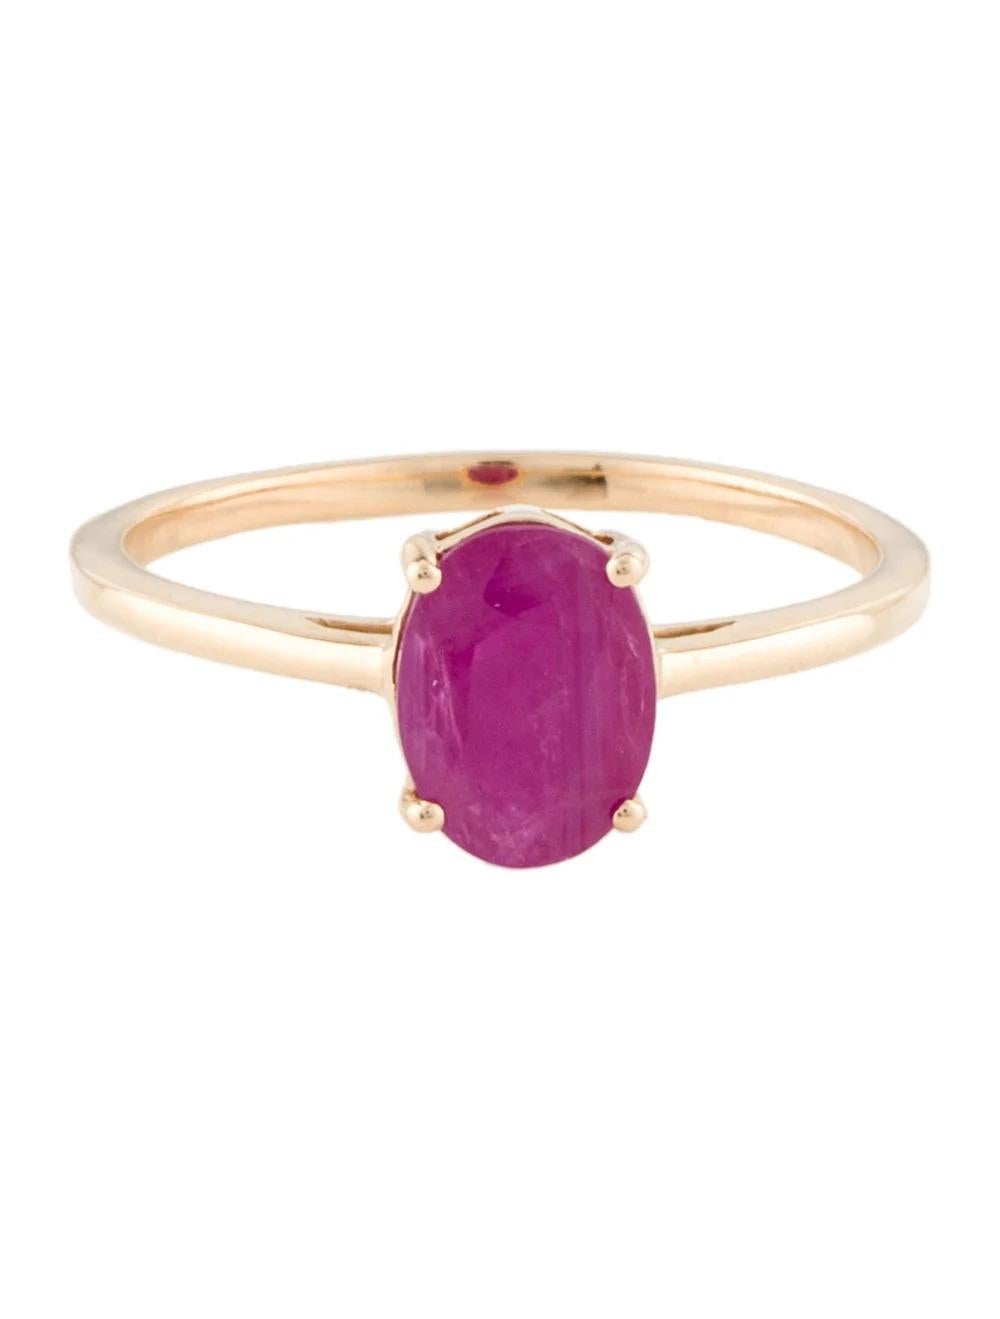 Oval Cut 14K Ruby Cocktail Ring - 1.13ct, Size 7, Timeless Elegance, Vibrant Gemstone For Sale